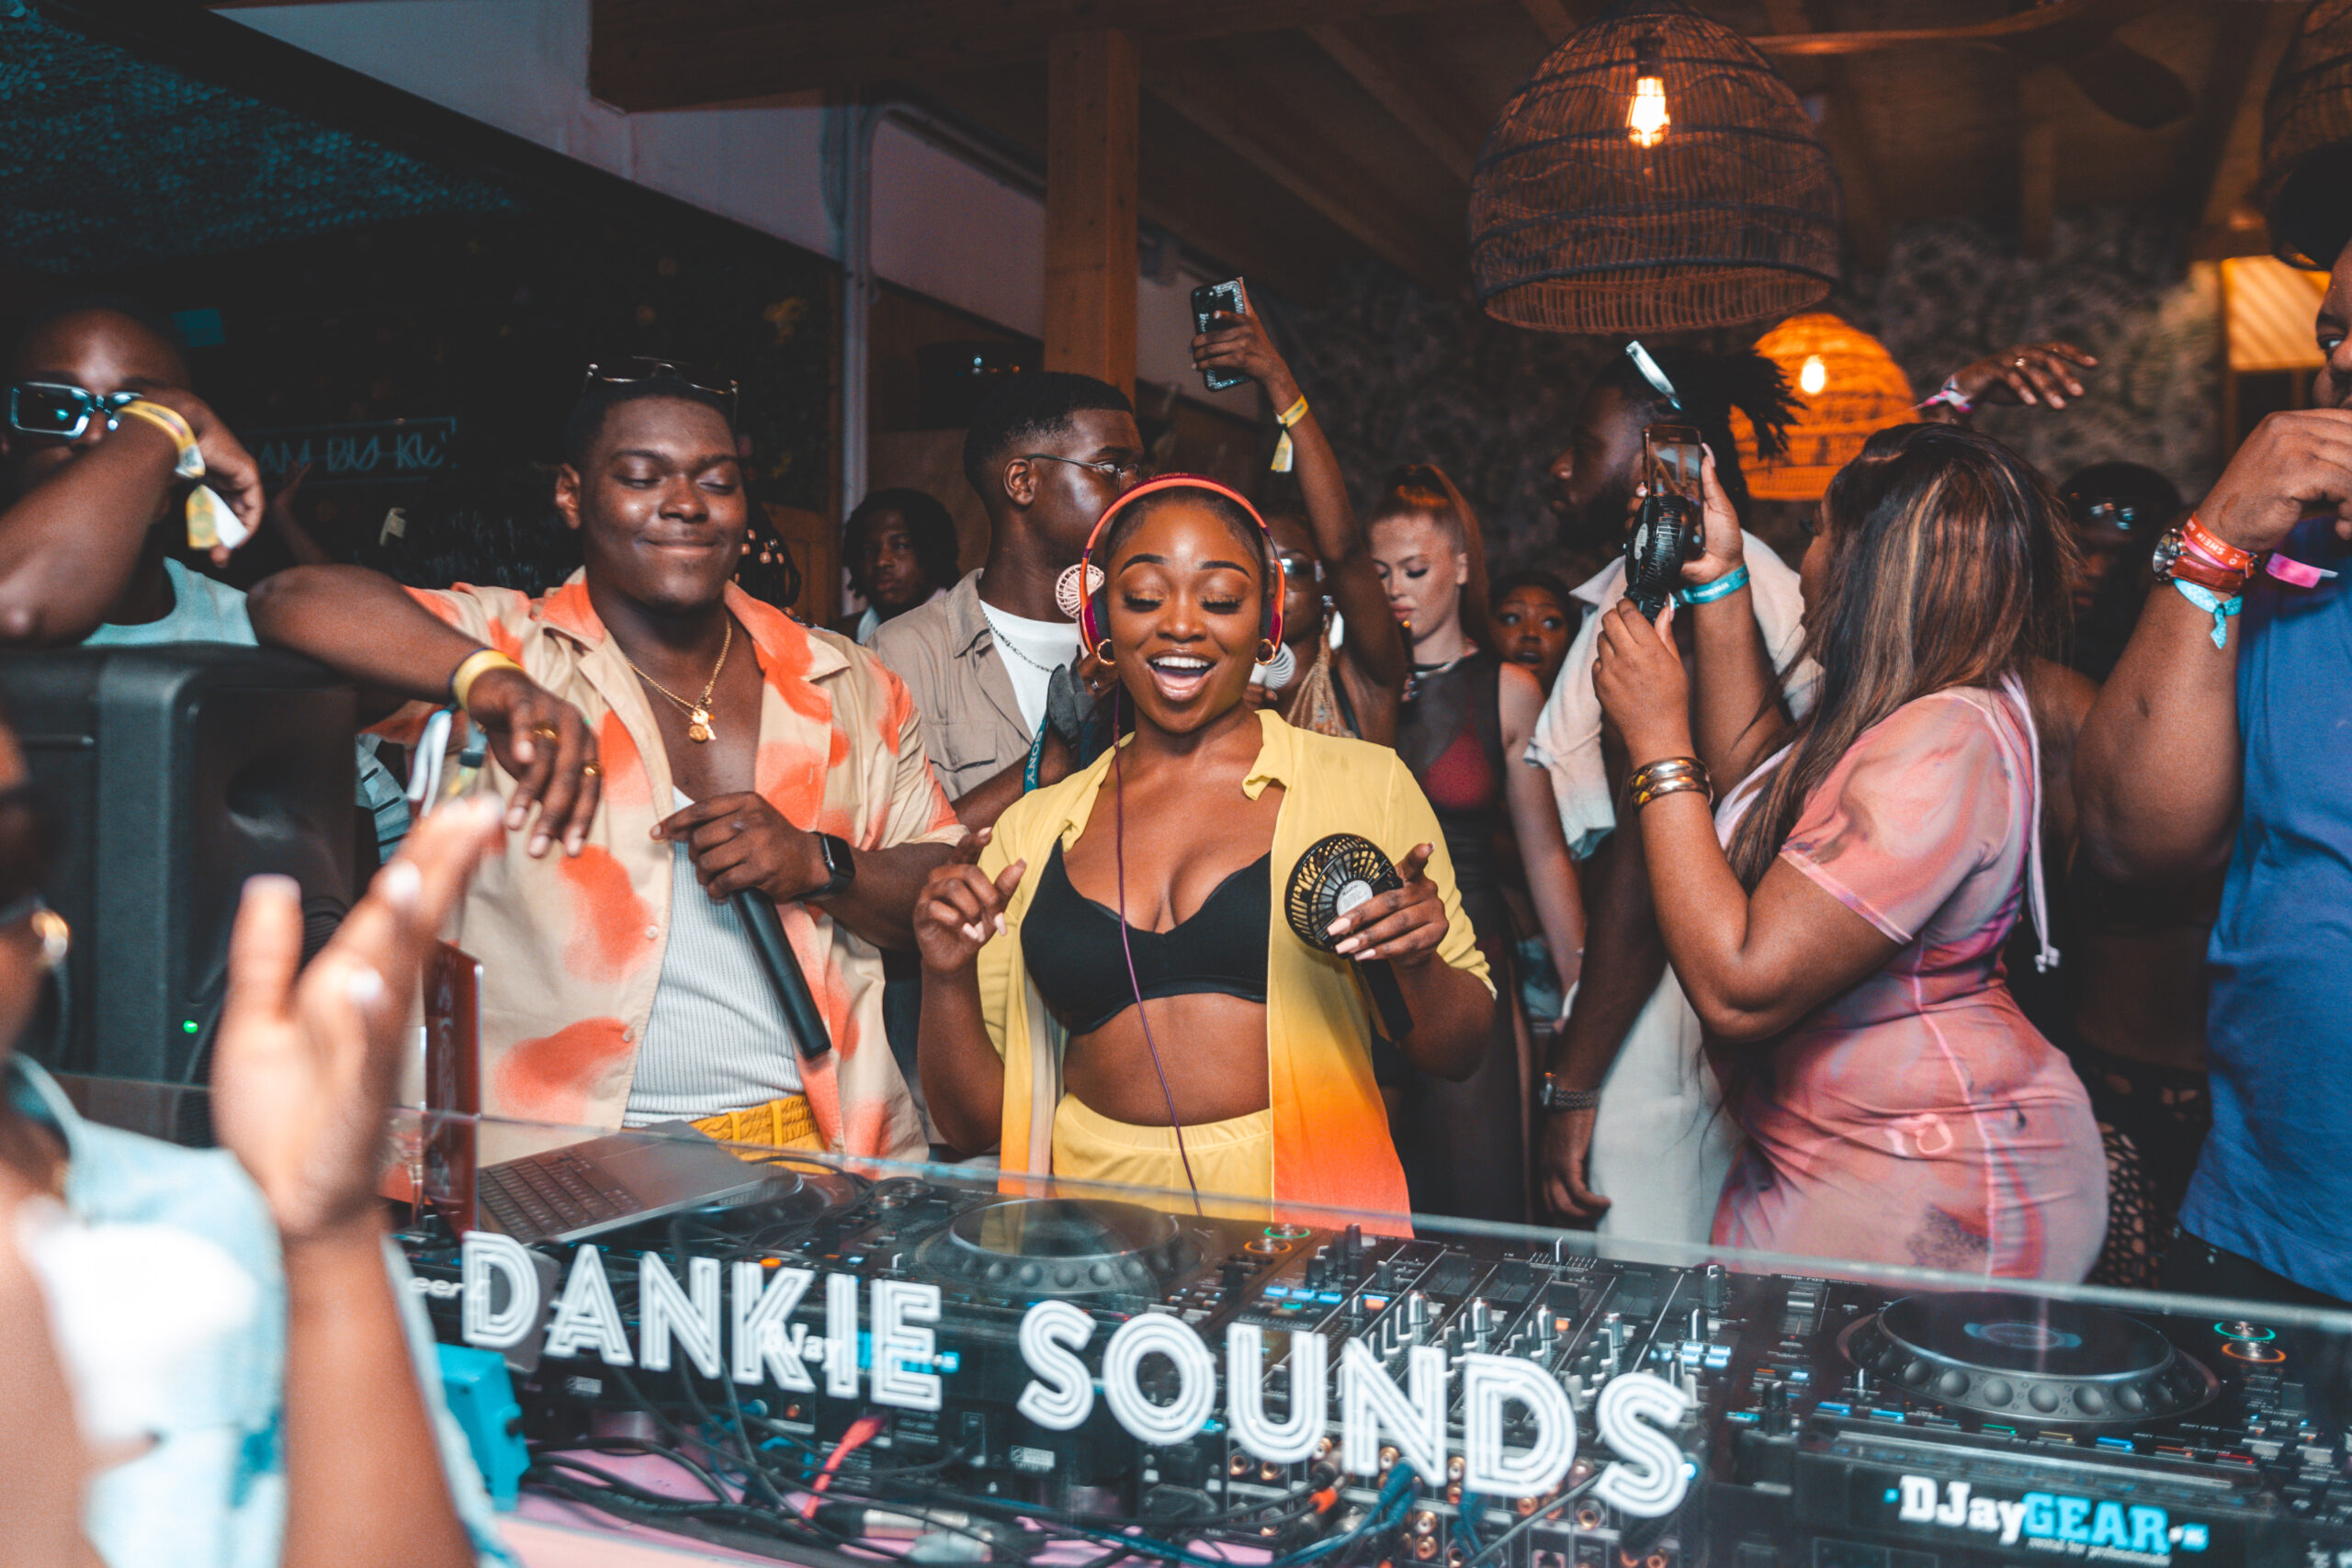 Redefining international parties, Dankie Sounds returns to the legendary island of Ibiza this September